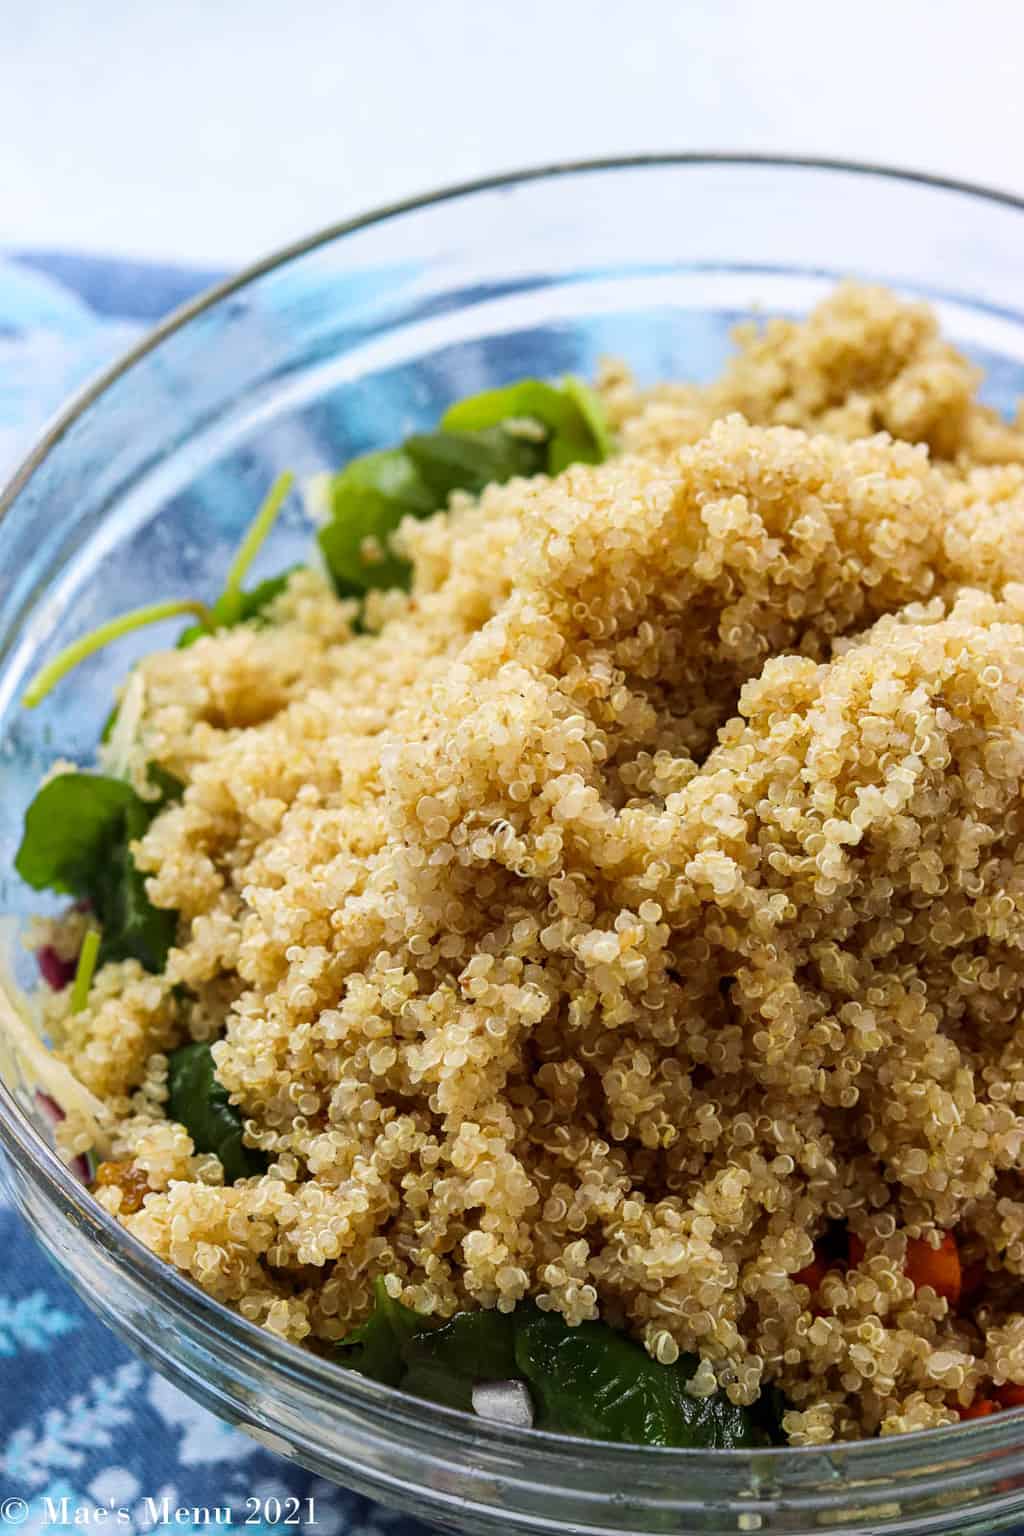 A large mixing bowl with quinoa and greens on the bottom